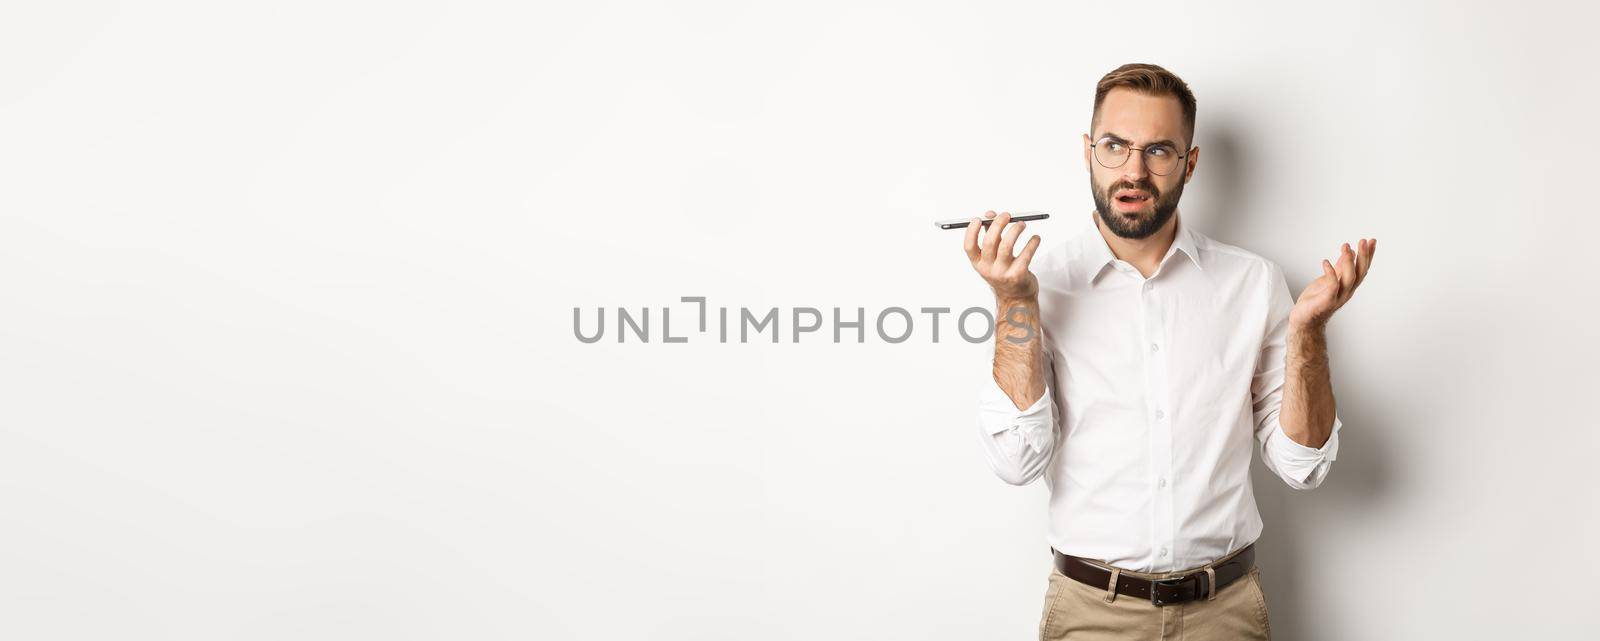 Man recording voice message or talking on speakerphone, looking confused, standing over white background.